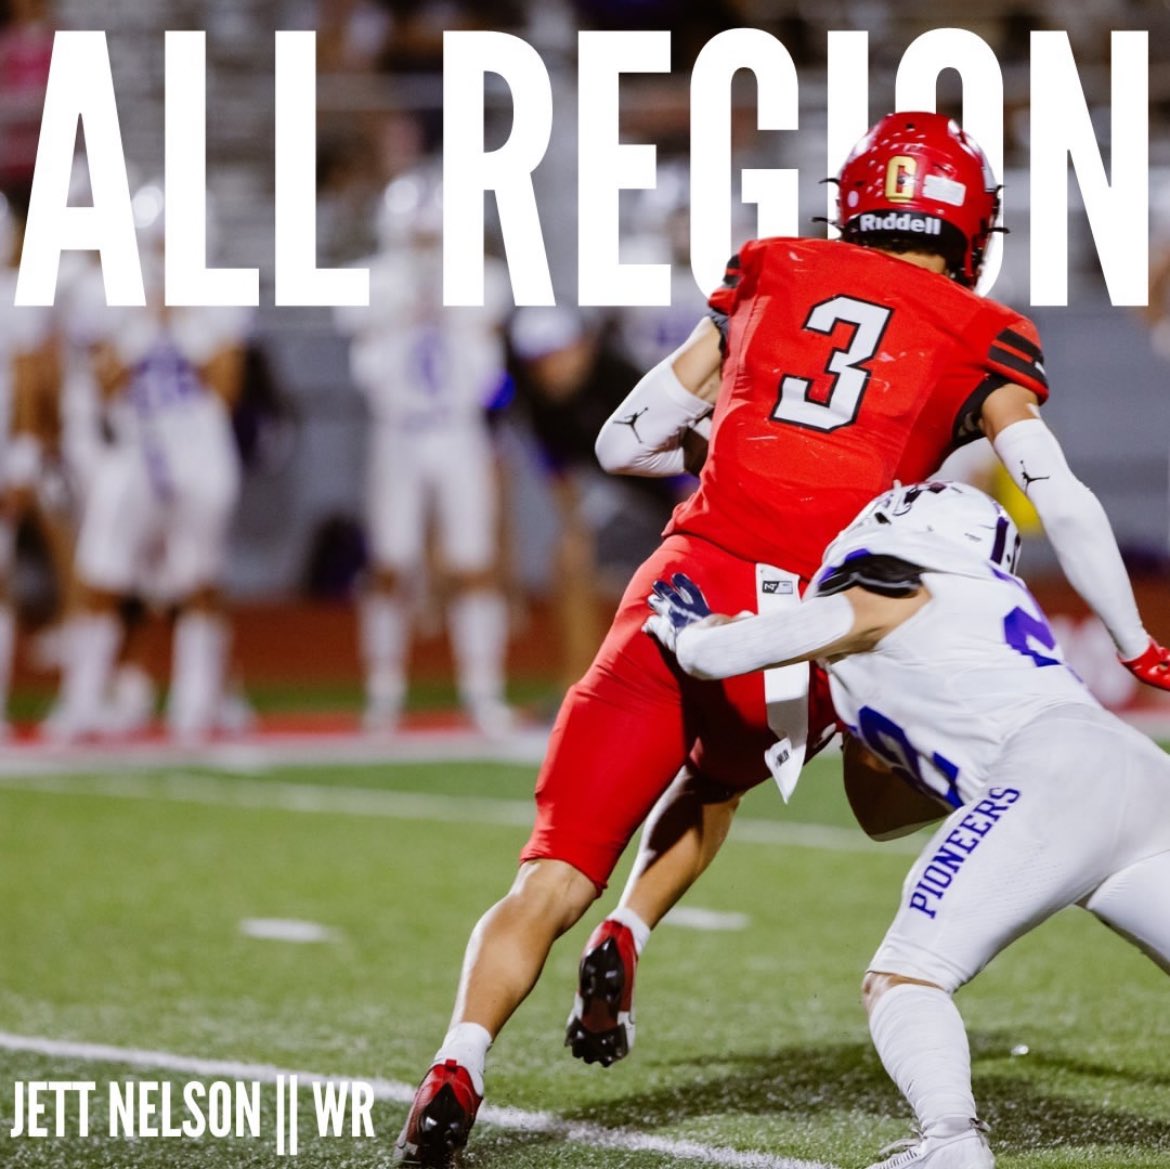 Grateful to be named to the all region 3 team! @cavemanfootball